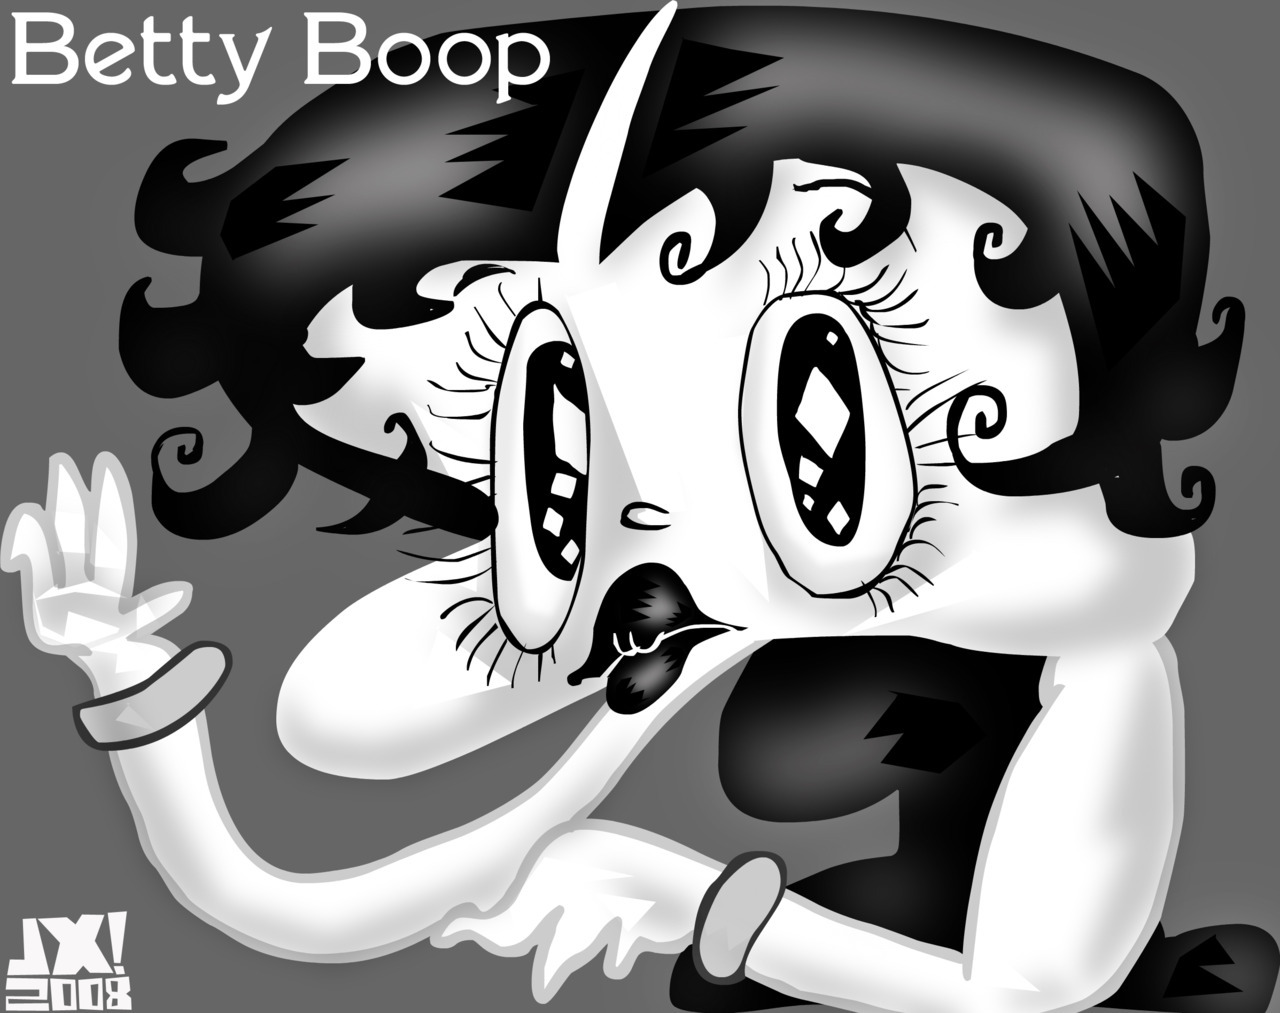 tumblrtoons: Betty Boop art originally posted April 7th, 2008 for Channel Frederator. Got Betty Boop on my mind tonite as I’m working on Original Cartoon Heroes. She was a cutie patoot! my version just makes her look all drugged out, but at least she’s a cutie drugged out patoot! -Jeaux 